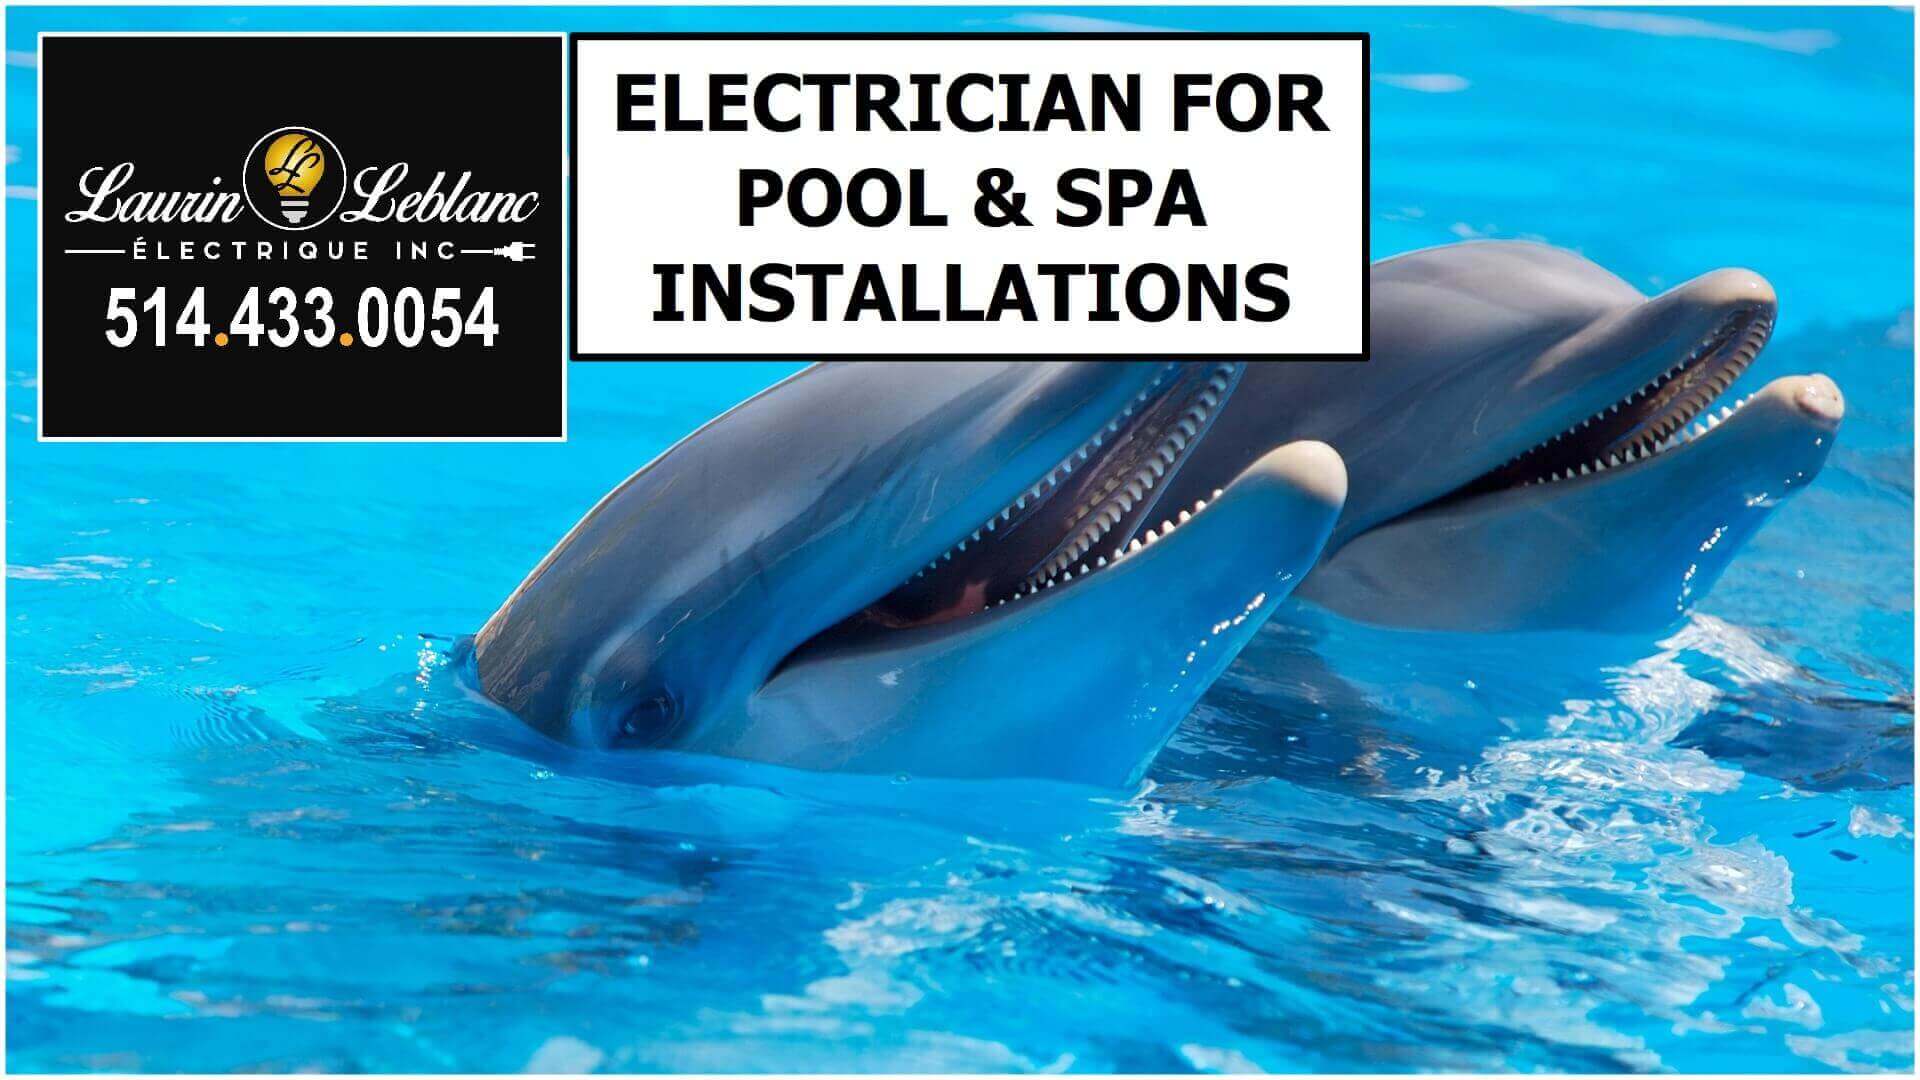 Pool Electrician in St-Lazare